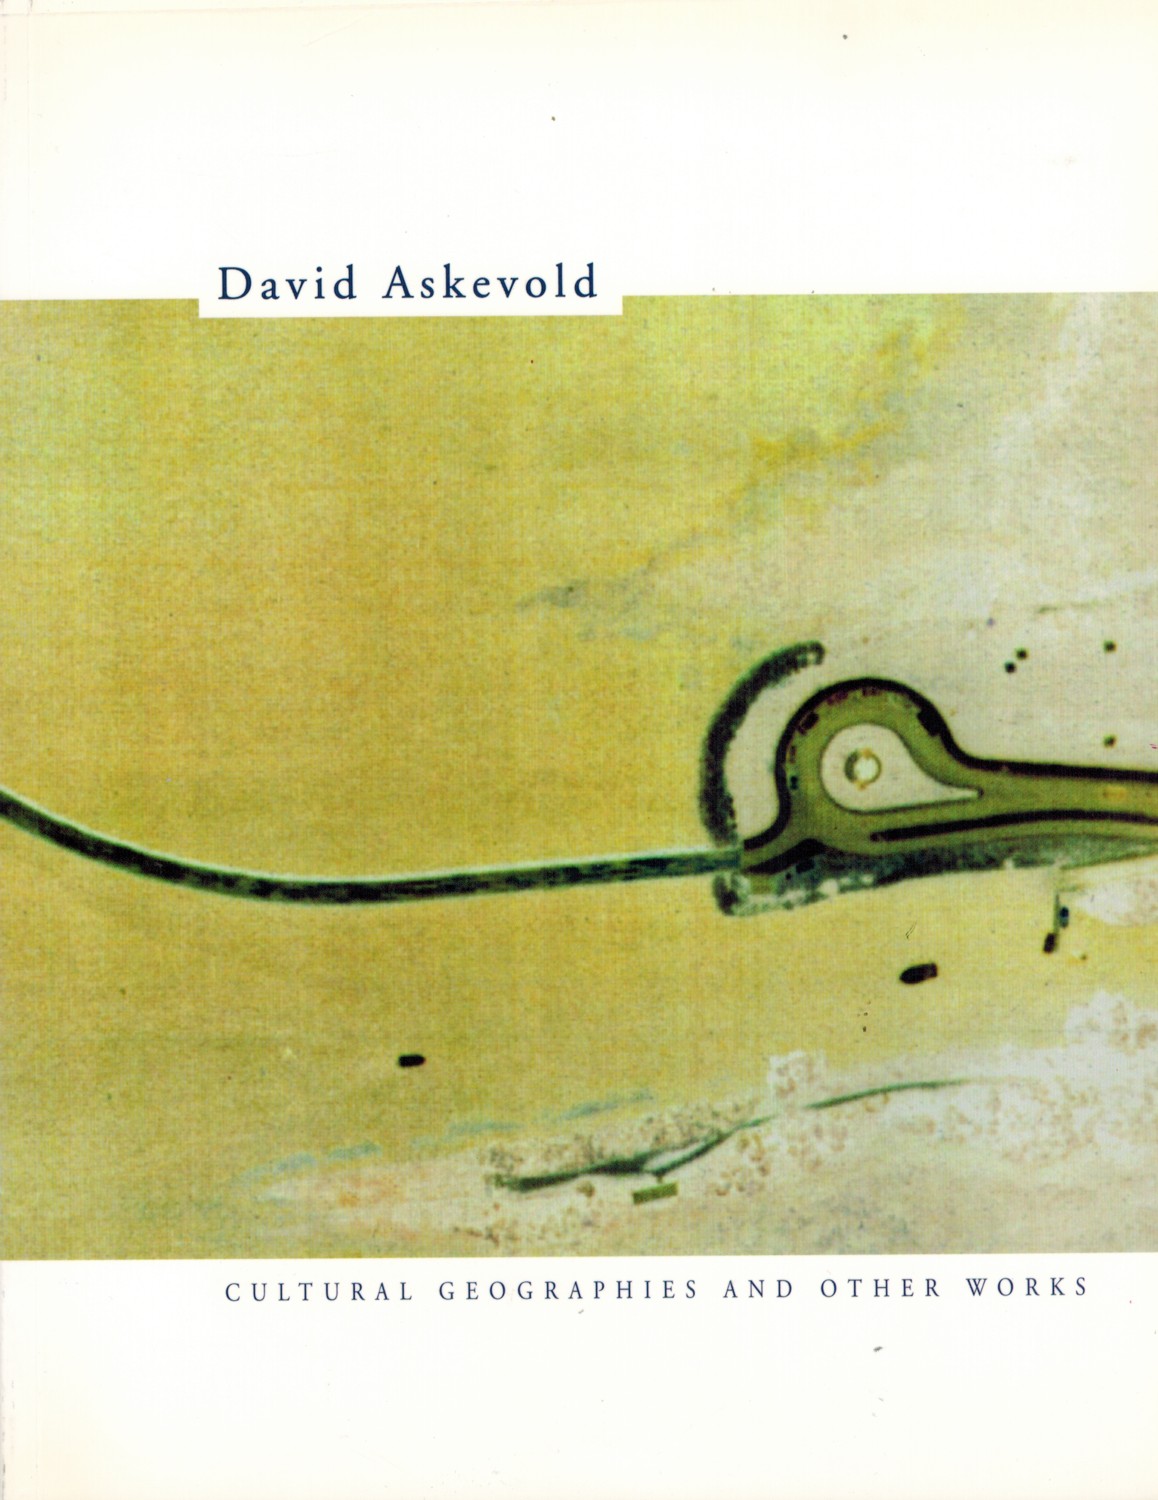 (ASKEVOLD, DAVID). Askevold, David, Mike Kelley, Cliff Eyland, Terry Graff & Petra Rigby Watson - DAVID ASKEVOLD: CULTURAL GEOGRAPHIES AND SELECTED WORKS - SIGNED PRESENTATION COPY FROM THE ARTIST